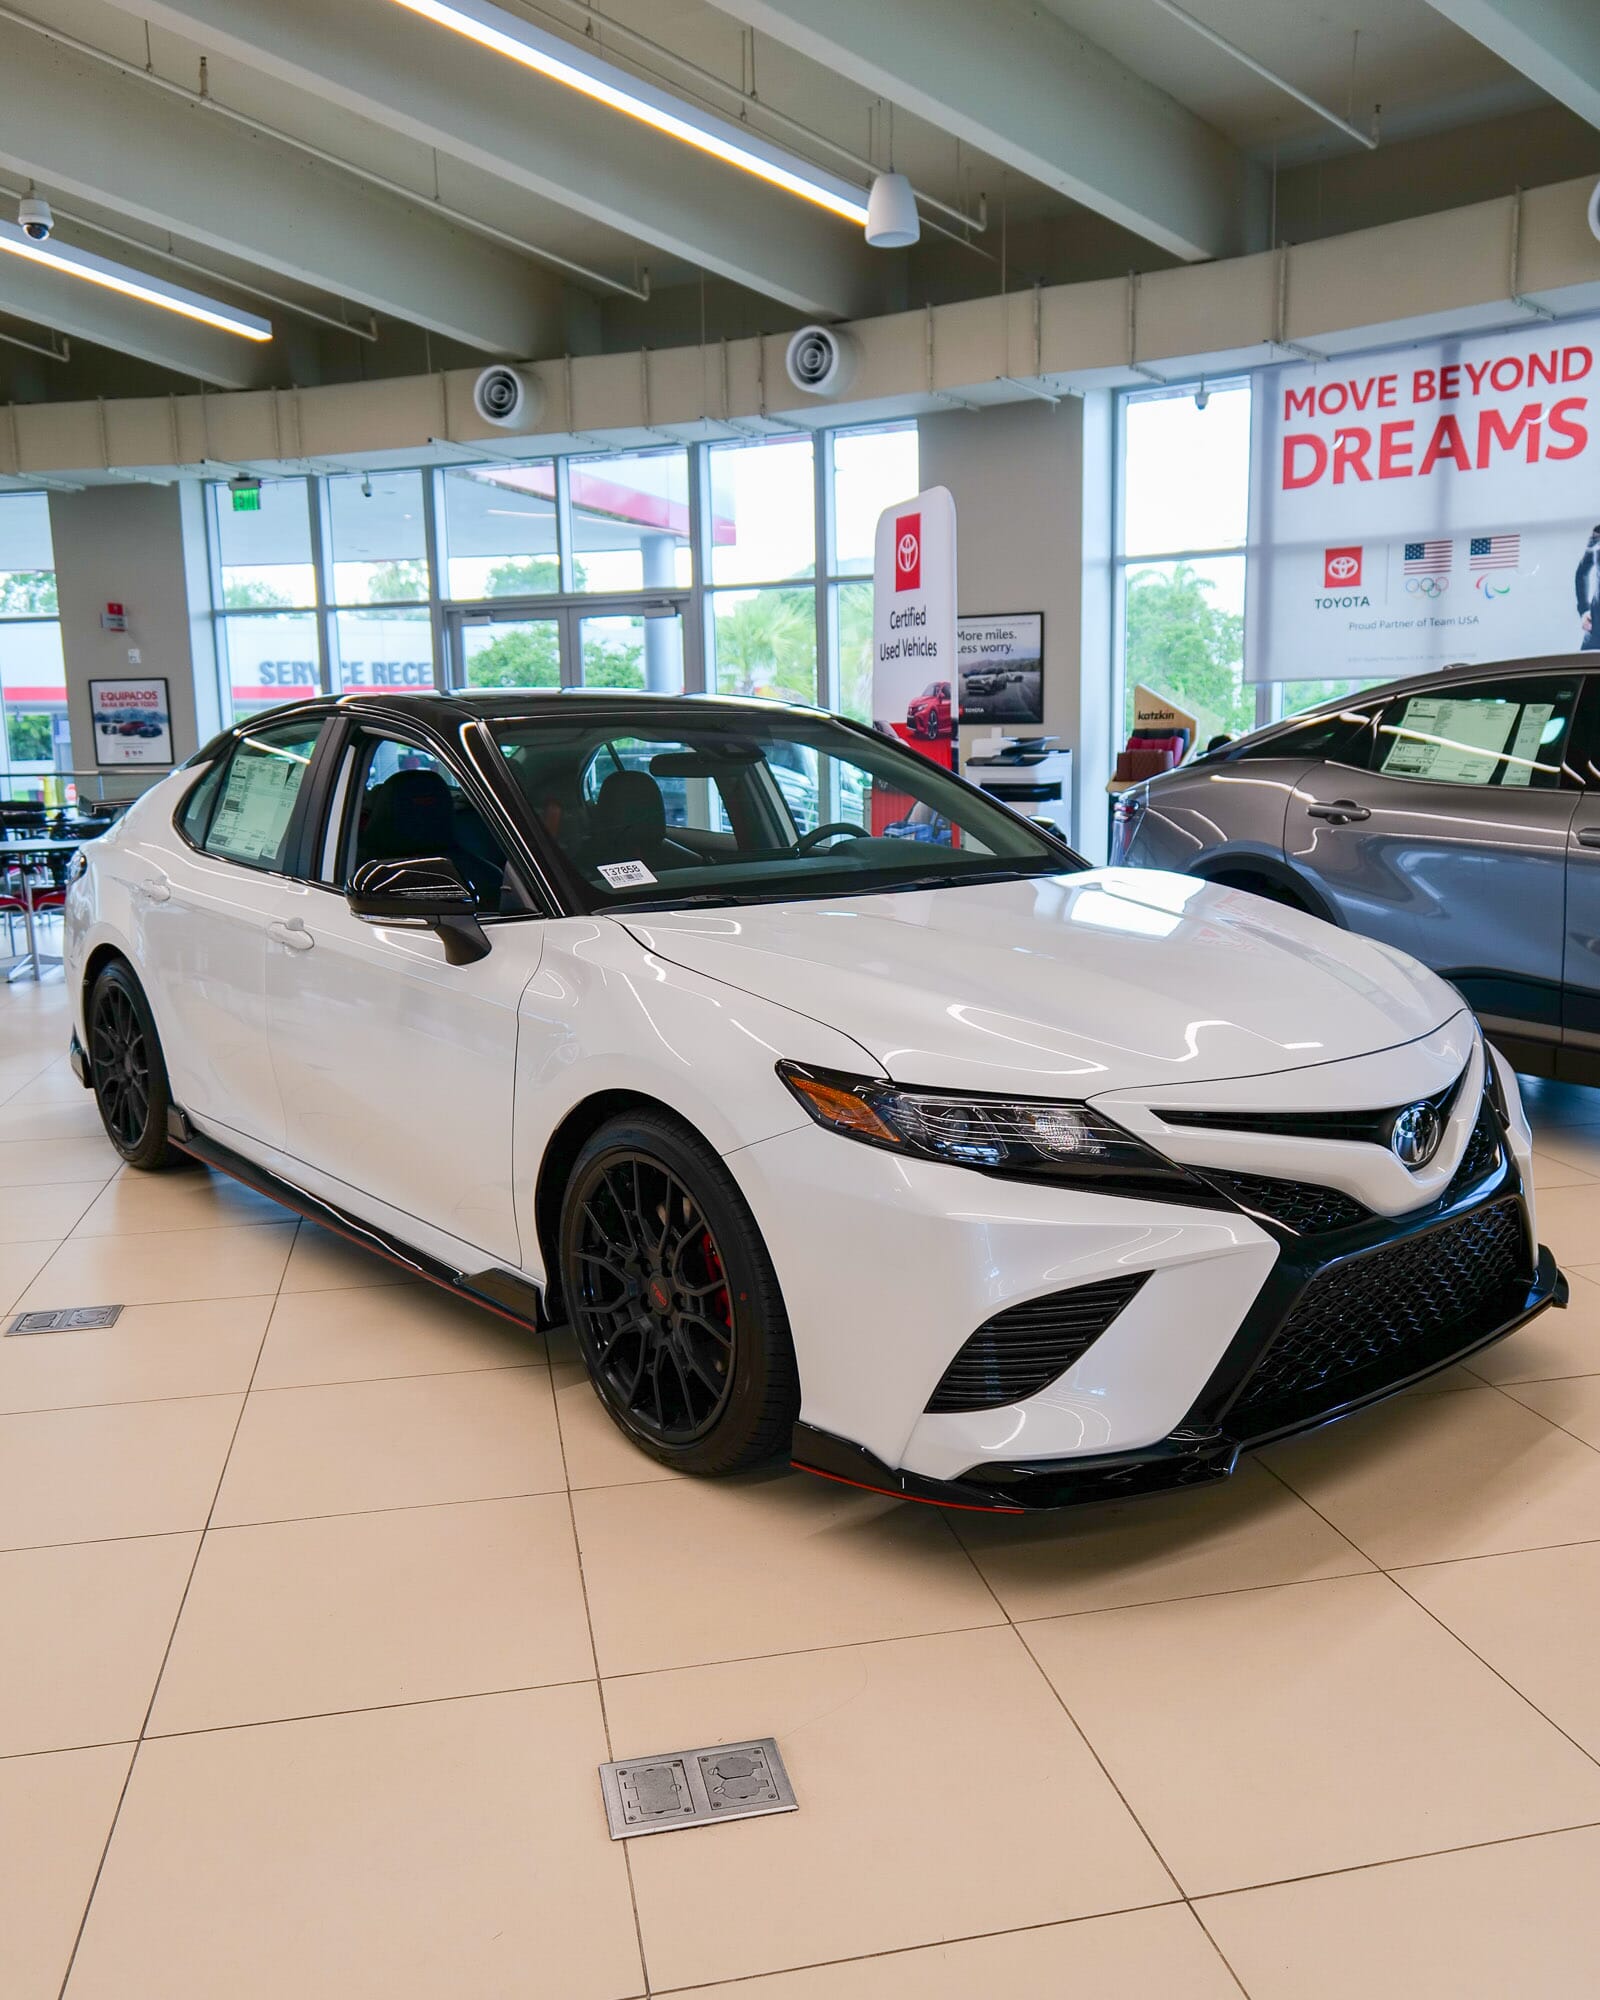 Looking for our best deals on Camry? Lease now with 0 down. All at